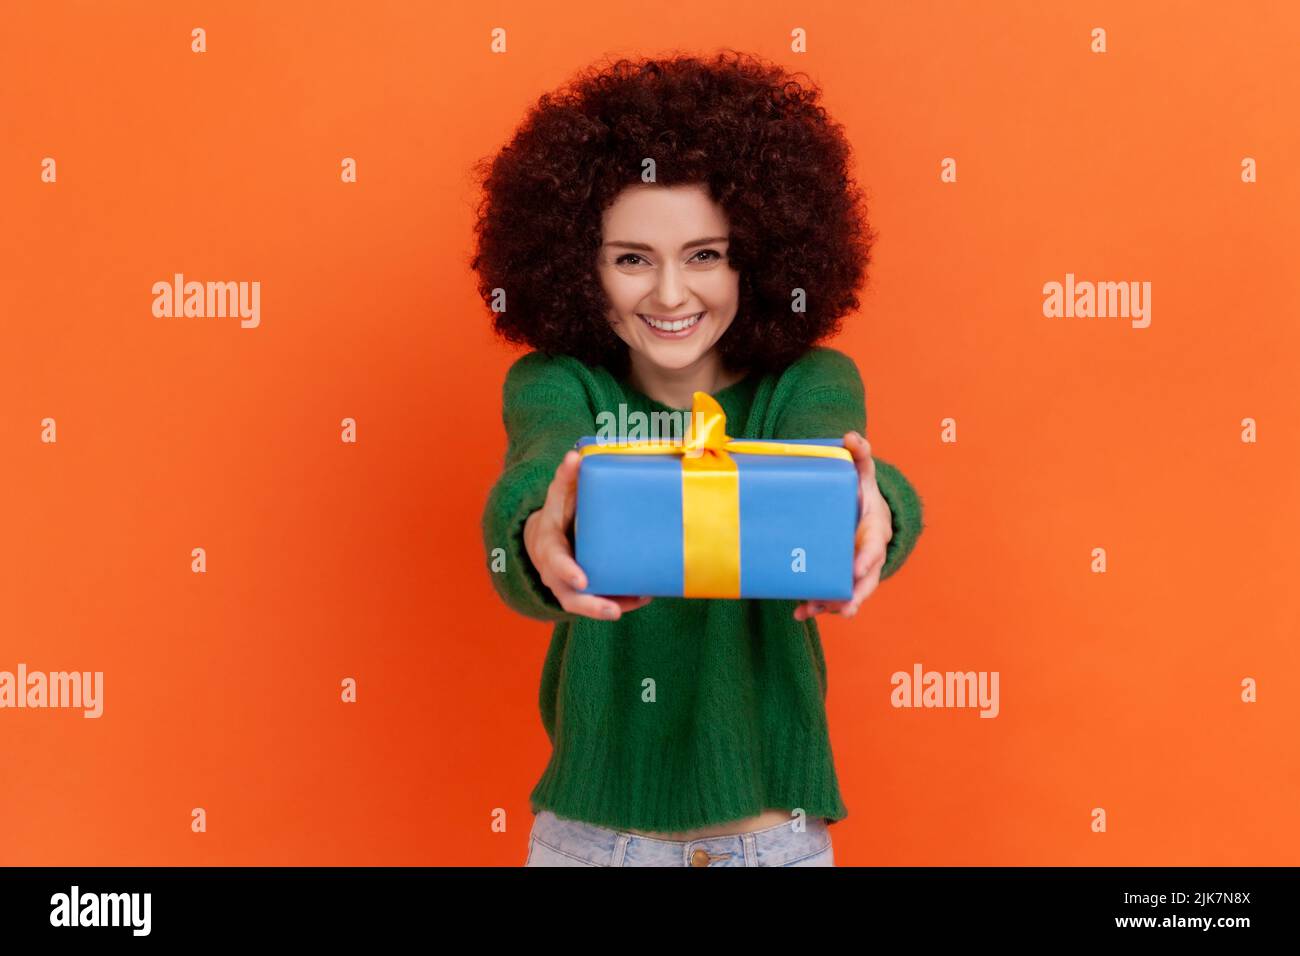 Portrait of winsome woman with Afro hairstyle wearing green casual style sweater giving present, holding out blue wrapped gift box. Indoor studio shot isolated on orange background. Stock Photo